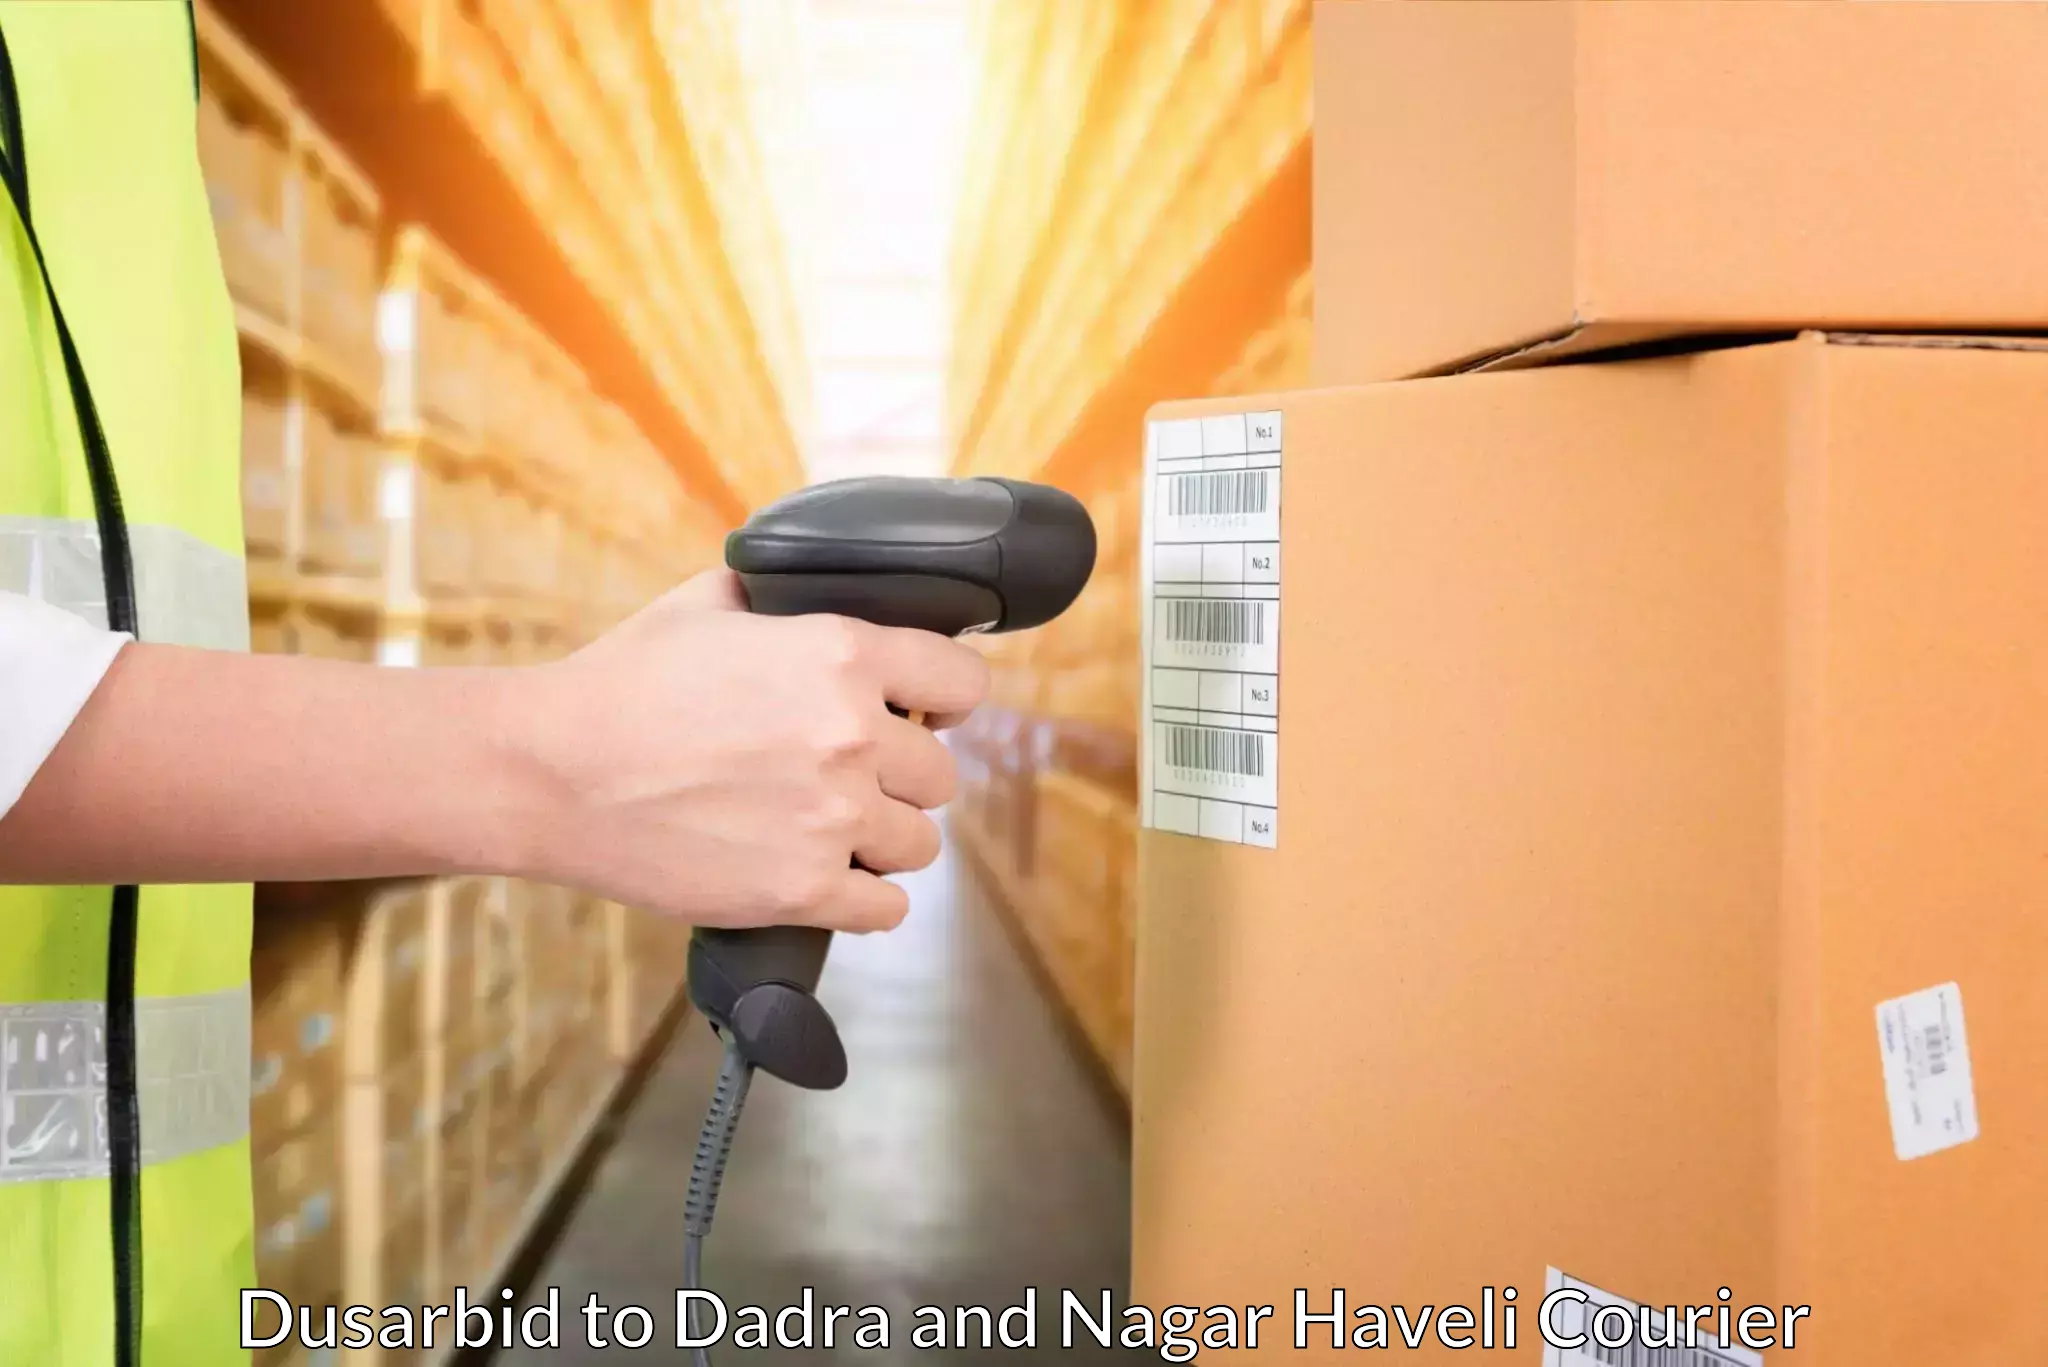 Rapid freight solutions Dusarbid to Dadra and Nagar Haveli